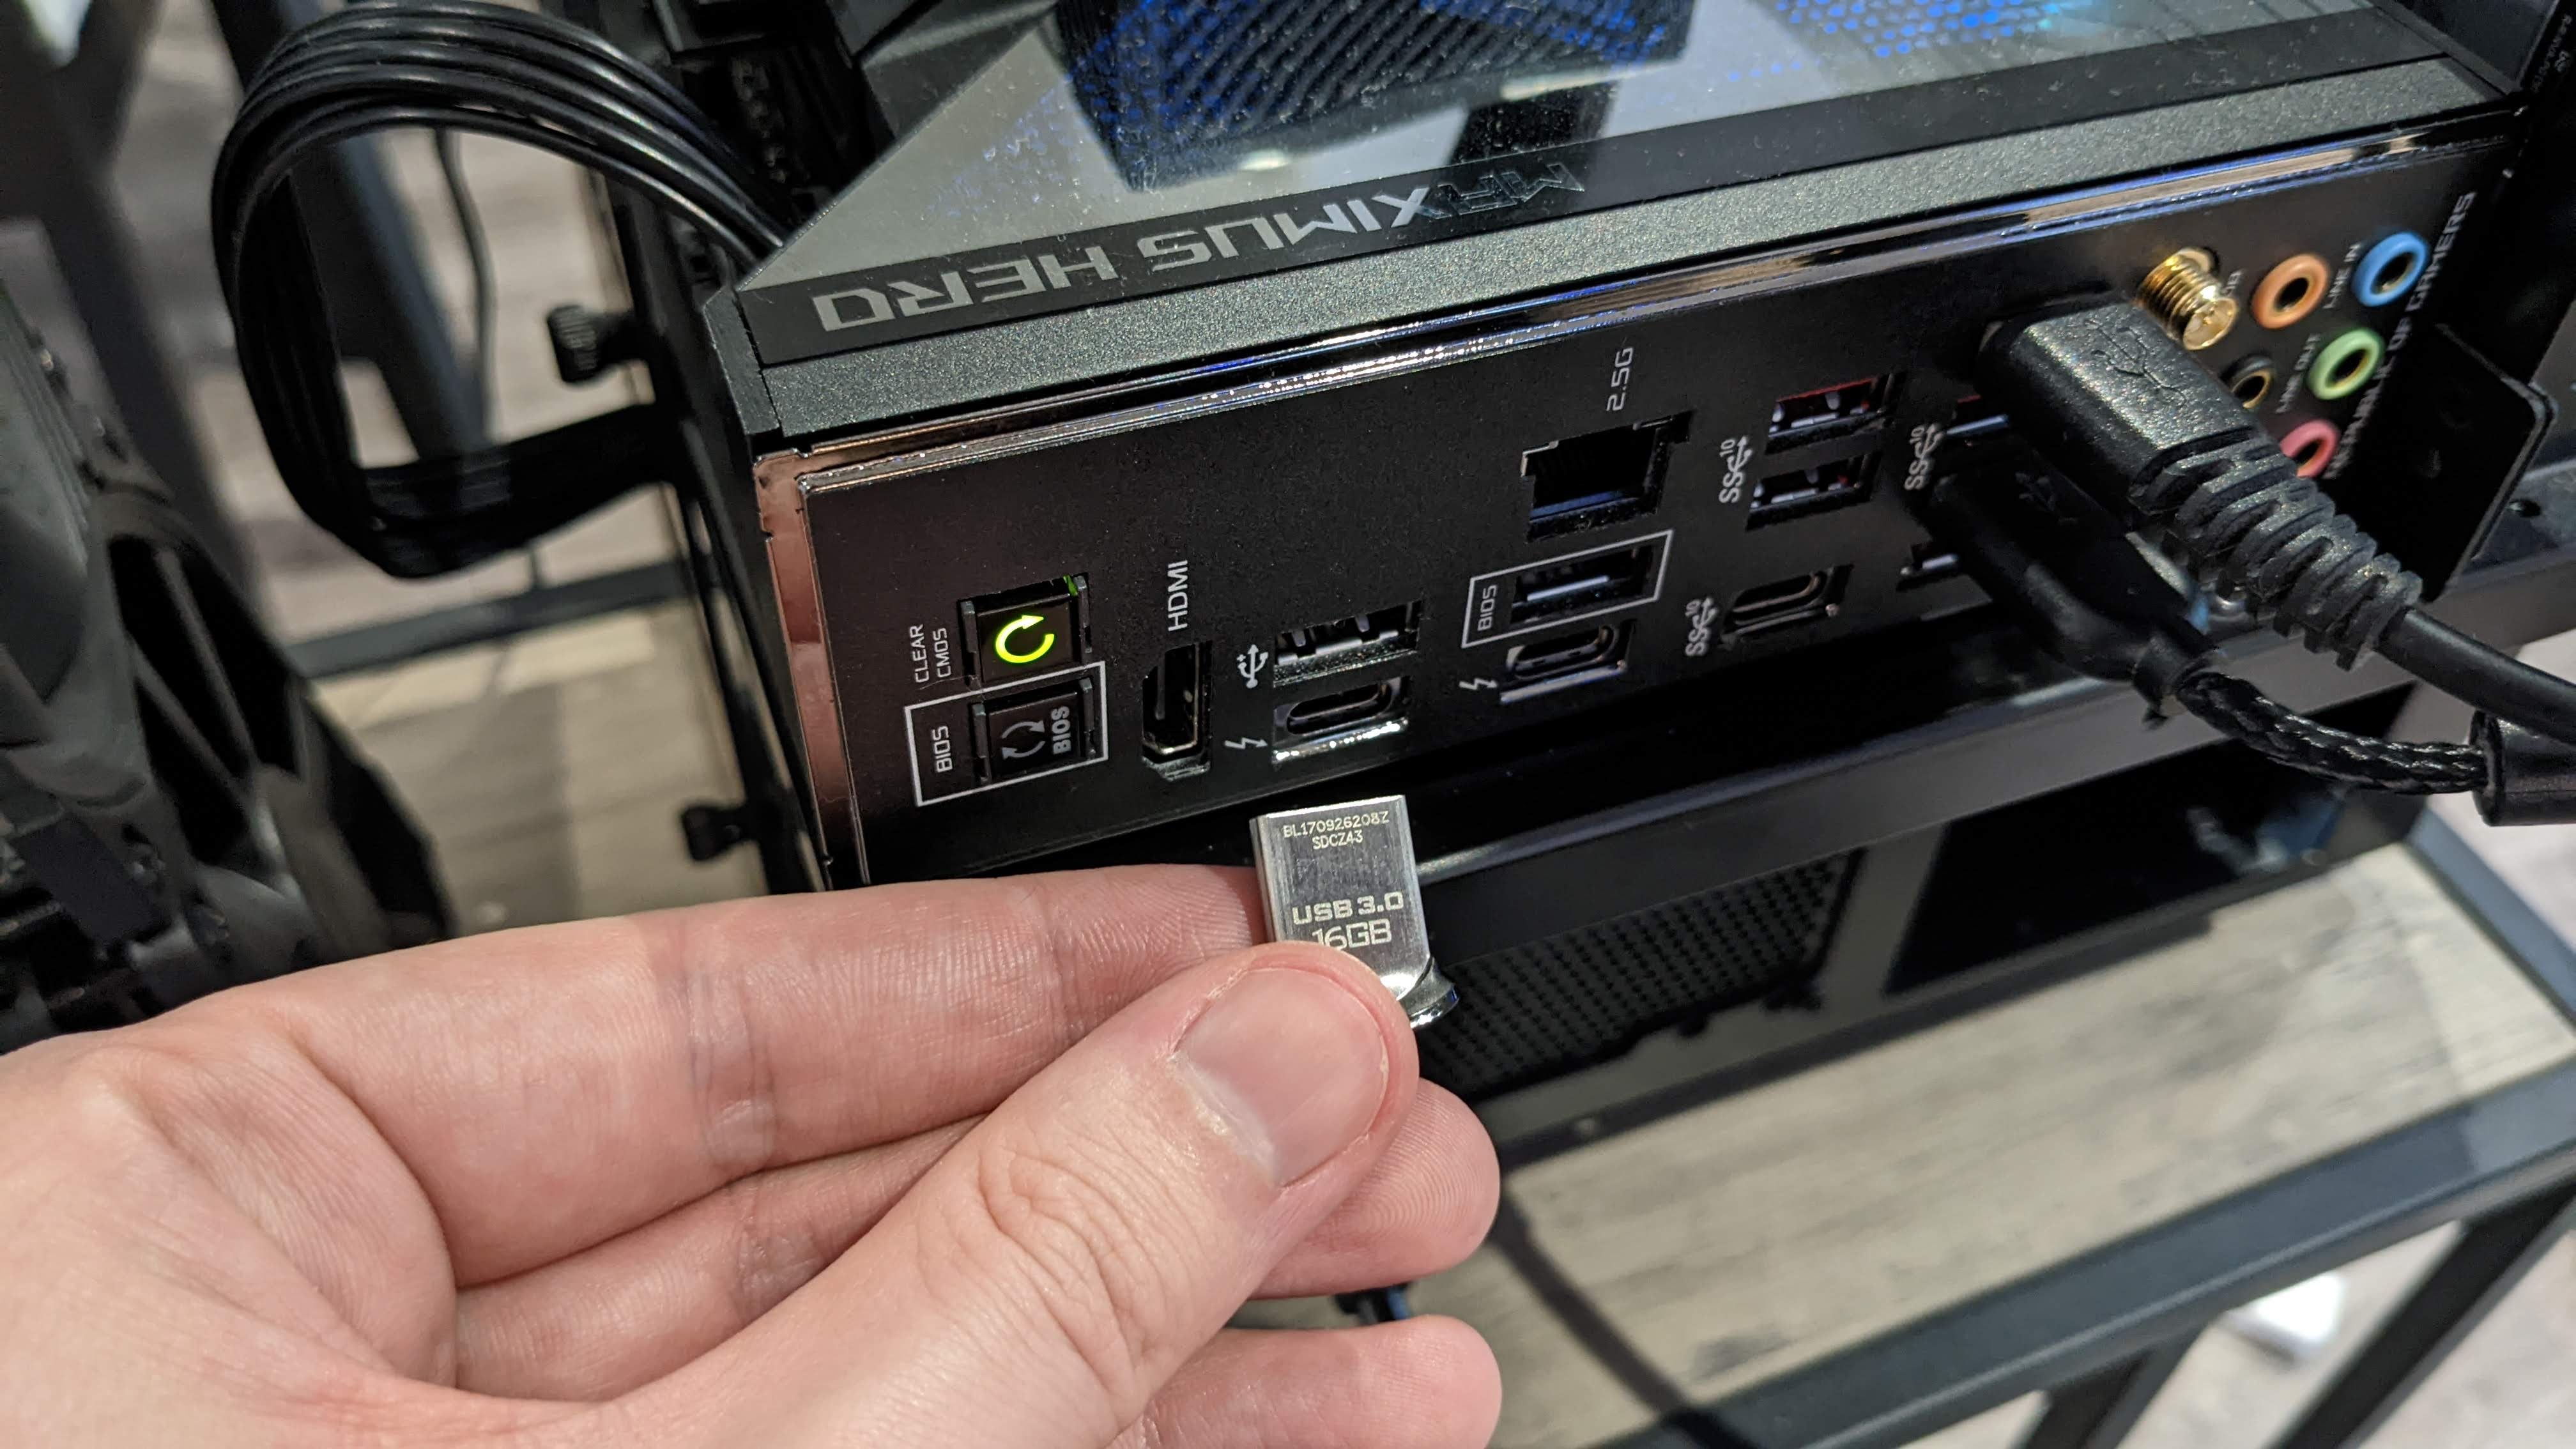 A small USB flash drive inserted into a spare slot on the rear I / O panel of a motherboard.